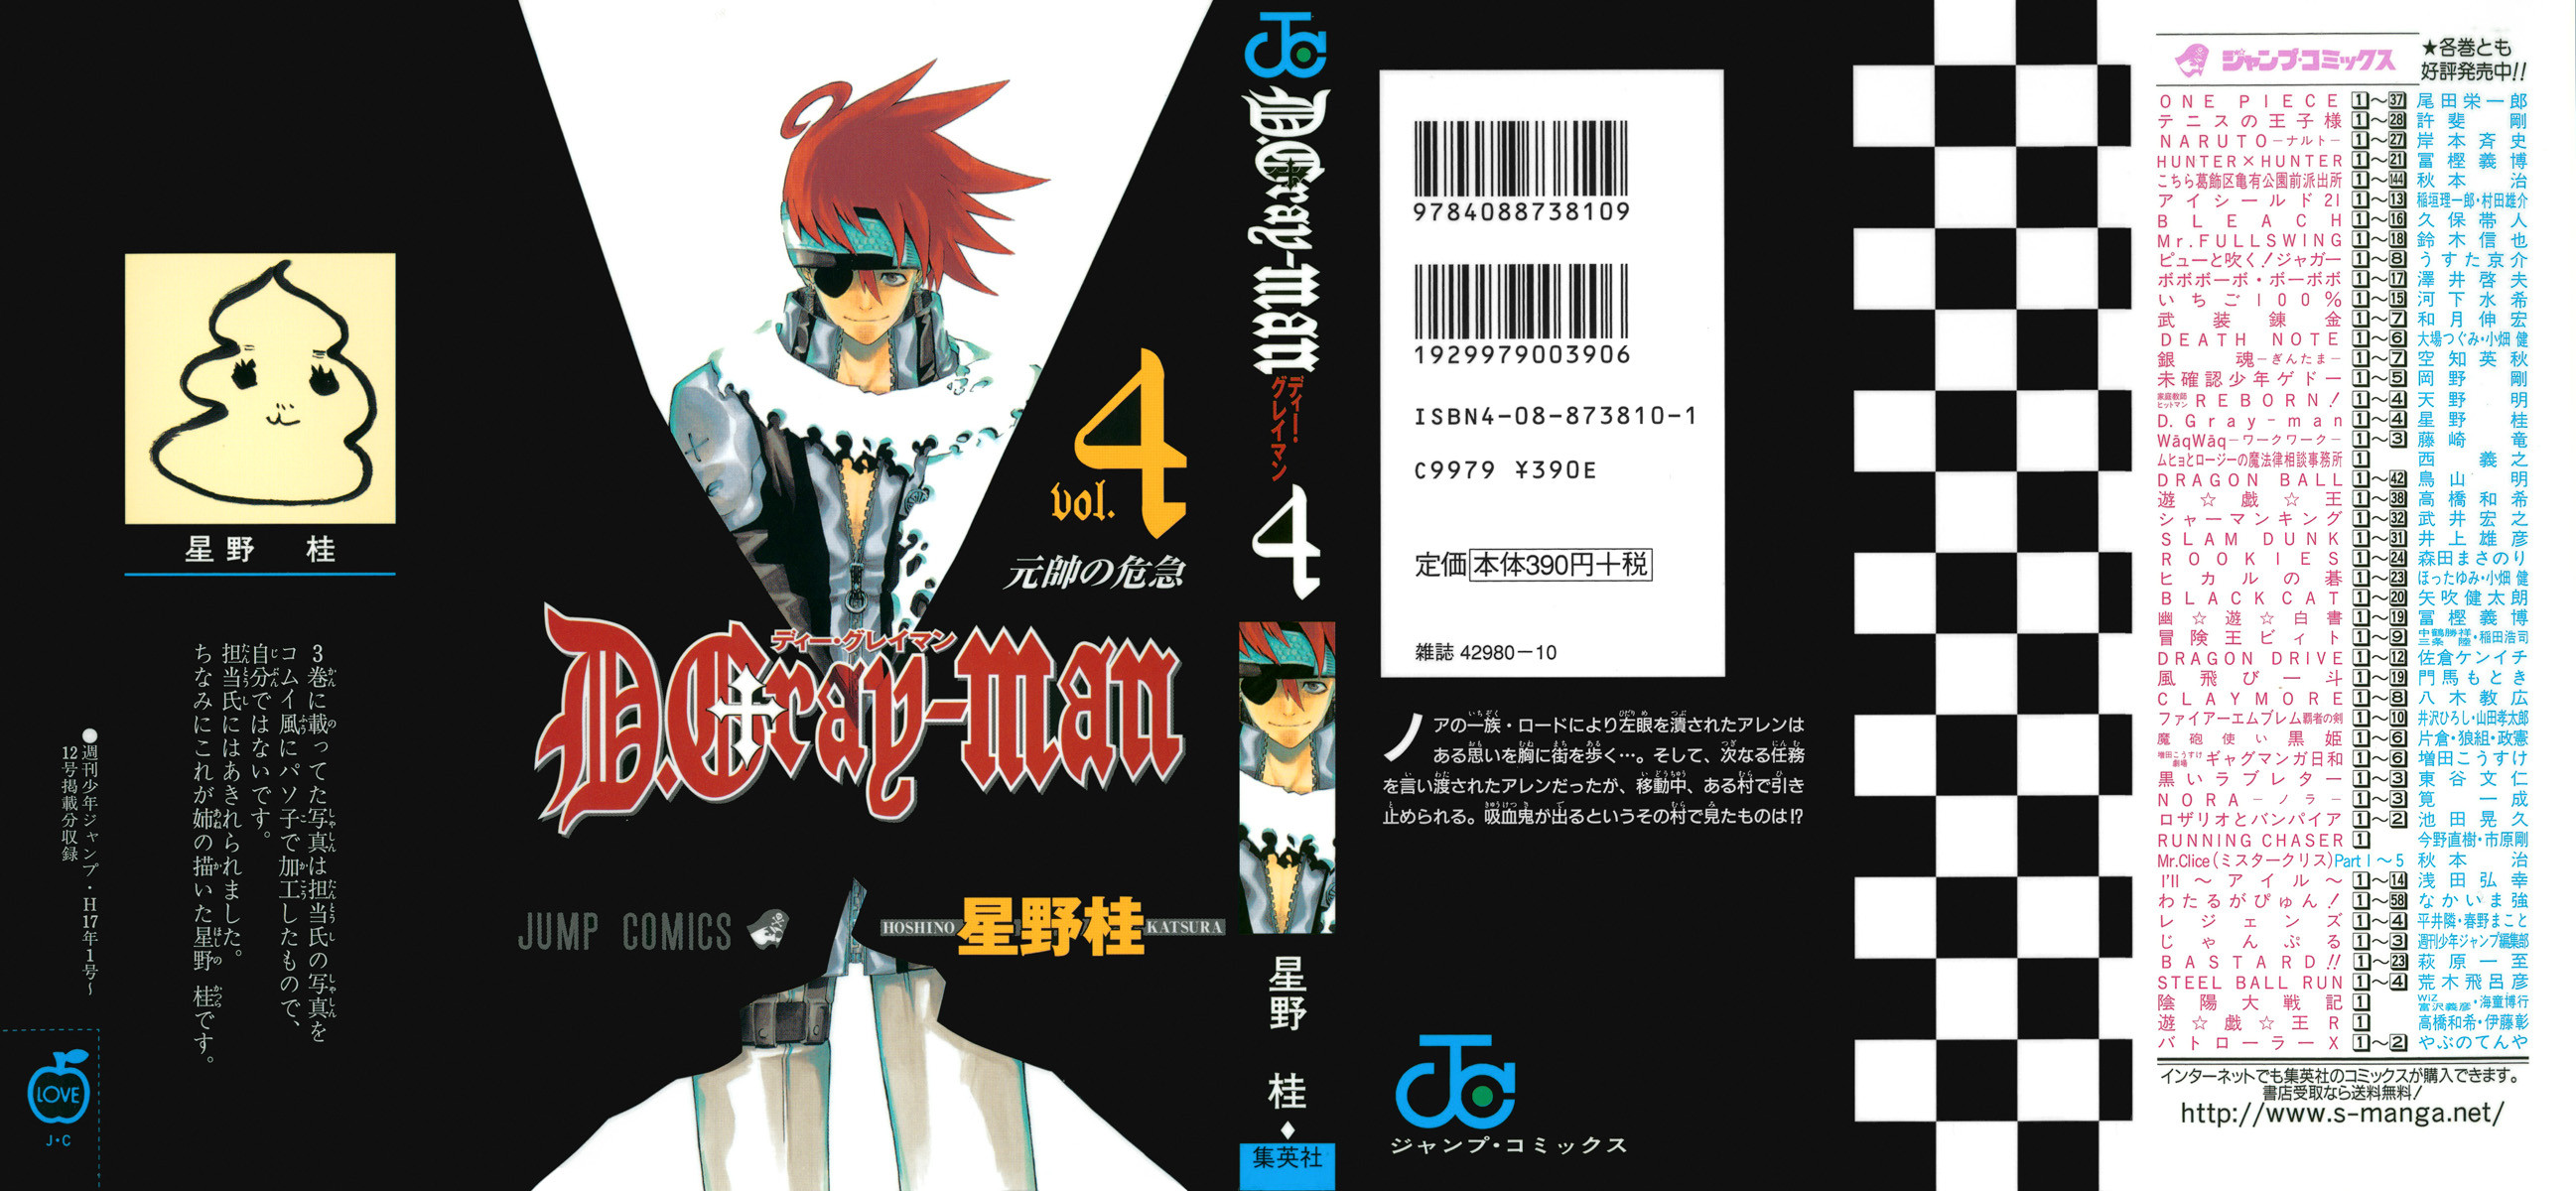 D Gray Man - Chapter Volume_04 - Page 1